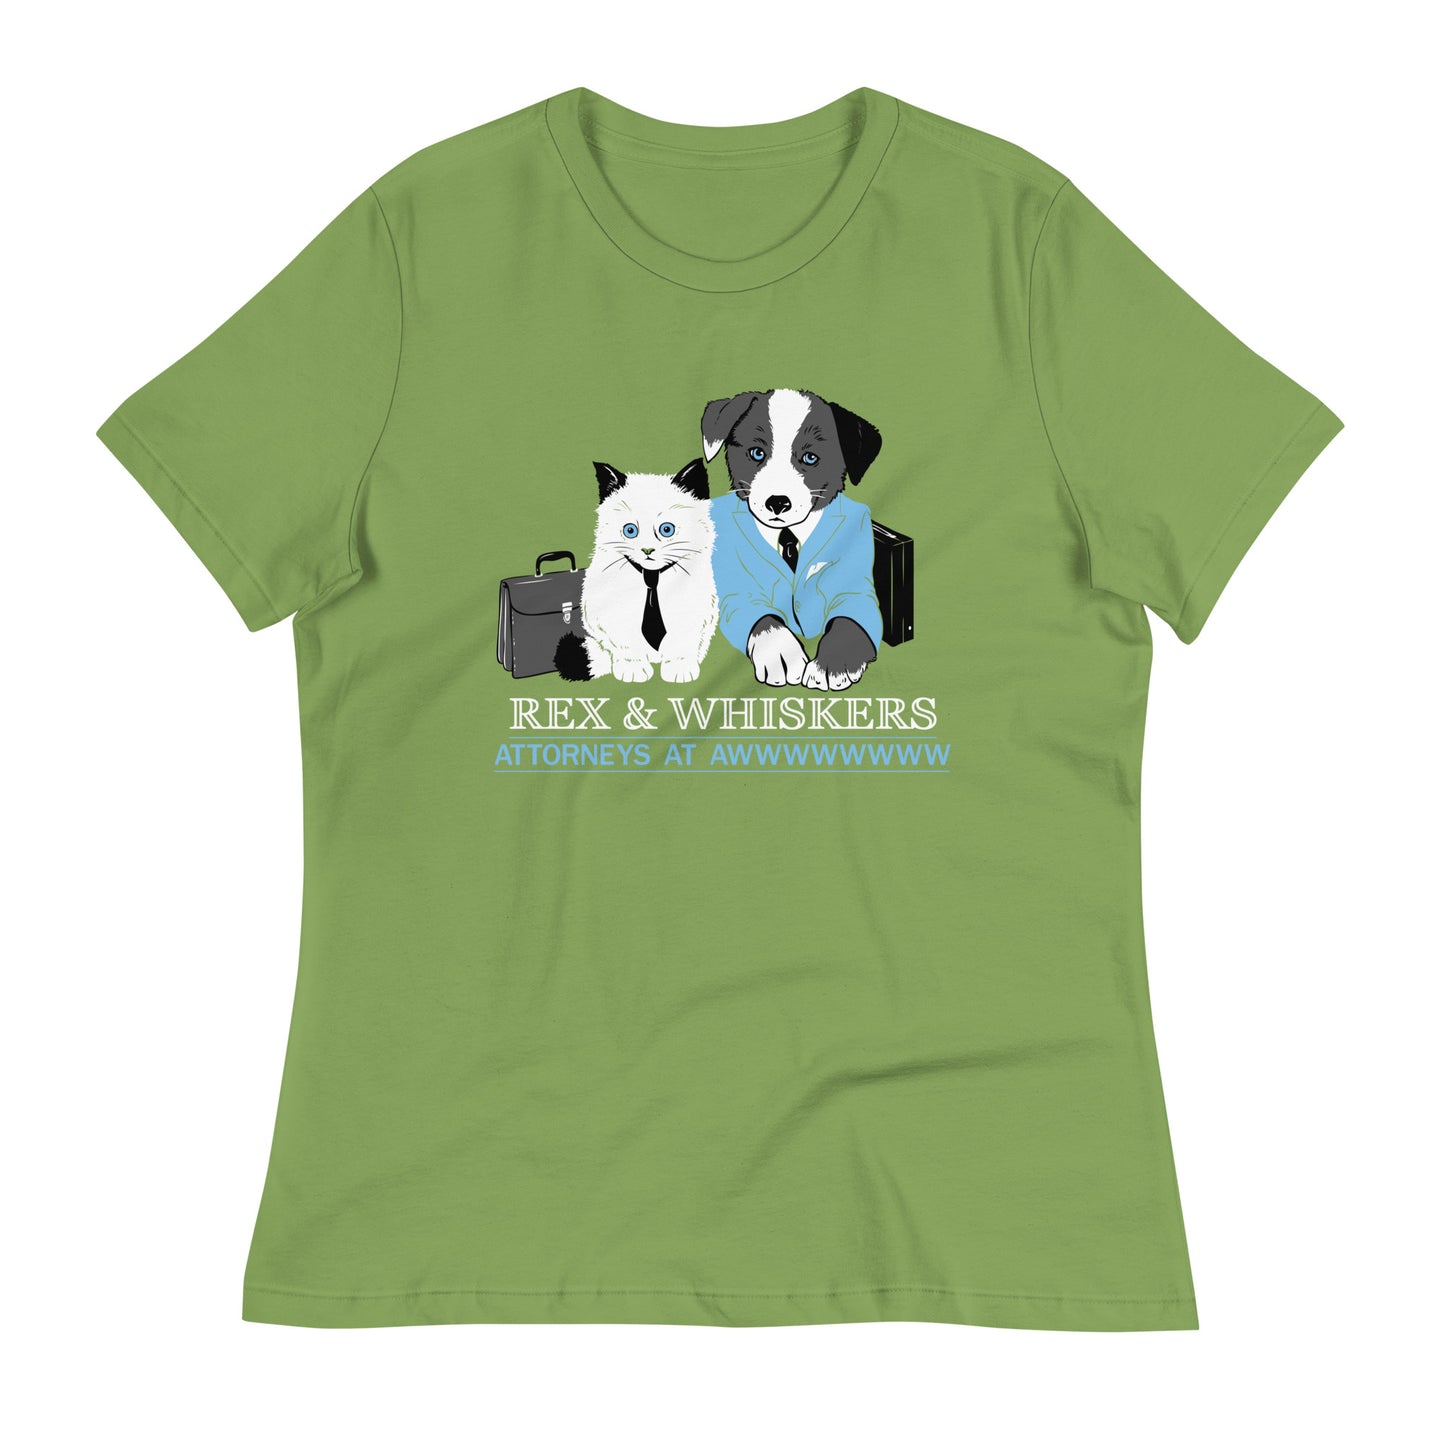 Rex and Whiskers Attorneys Women's Signature Tee